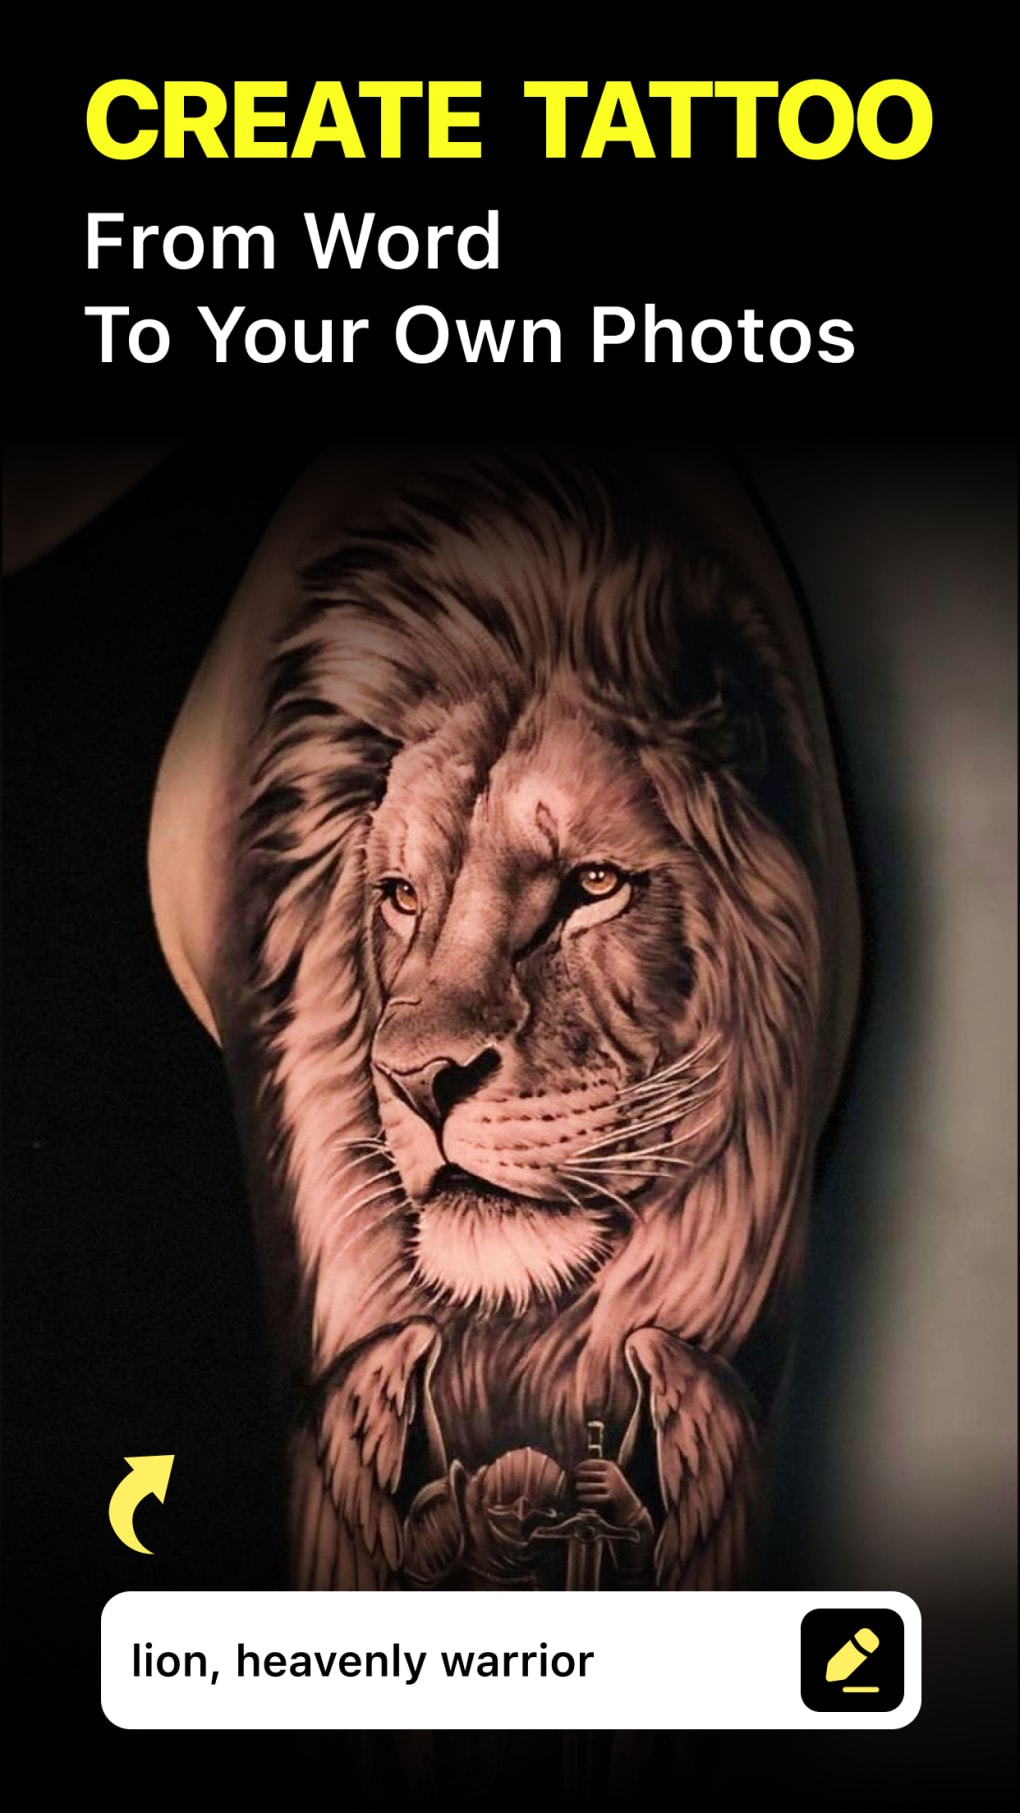 Tattoo Maker - Tattoo Designs for iPhone - Free App Download